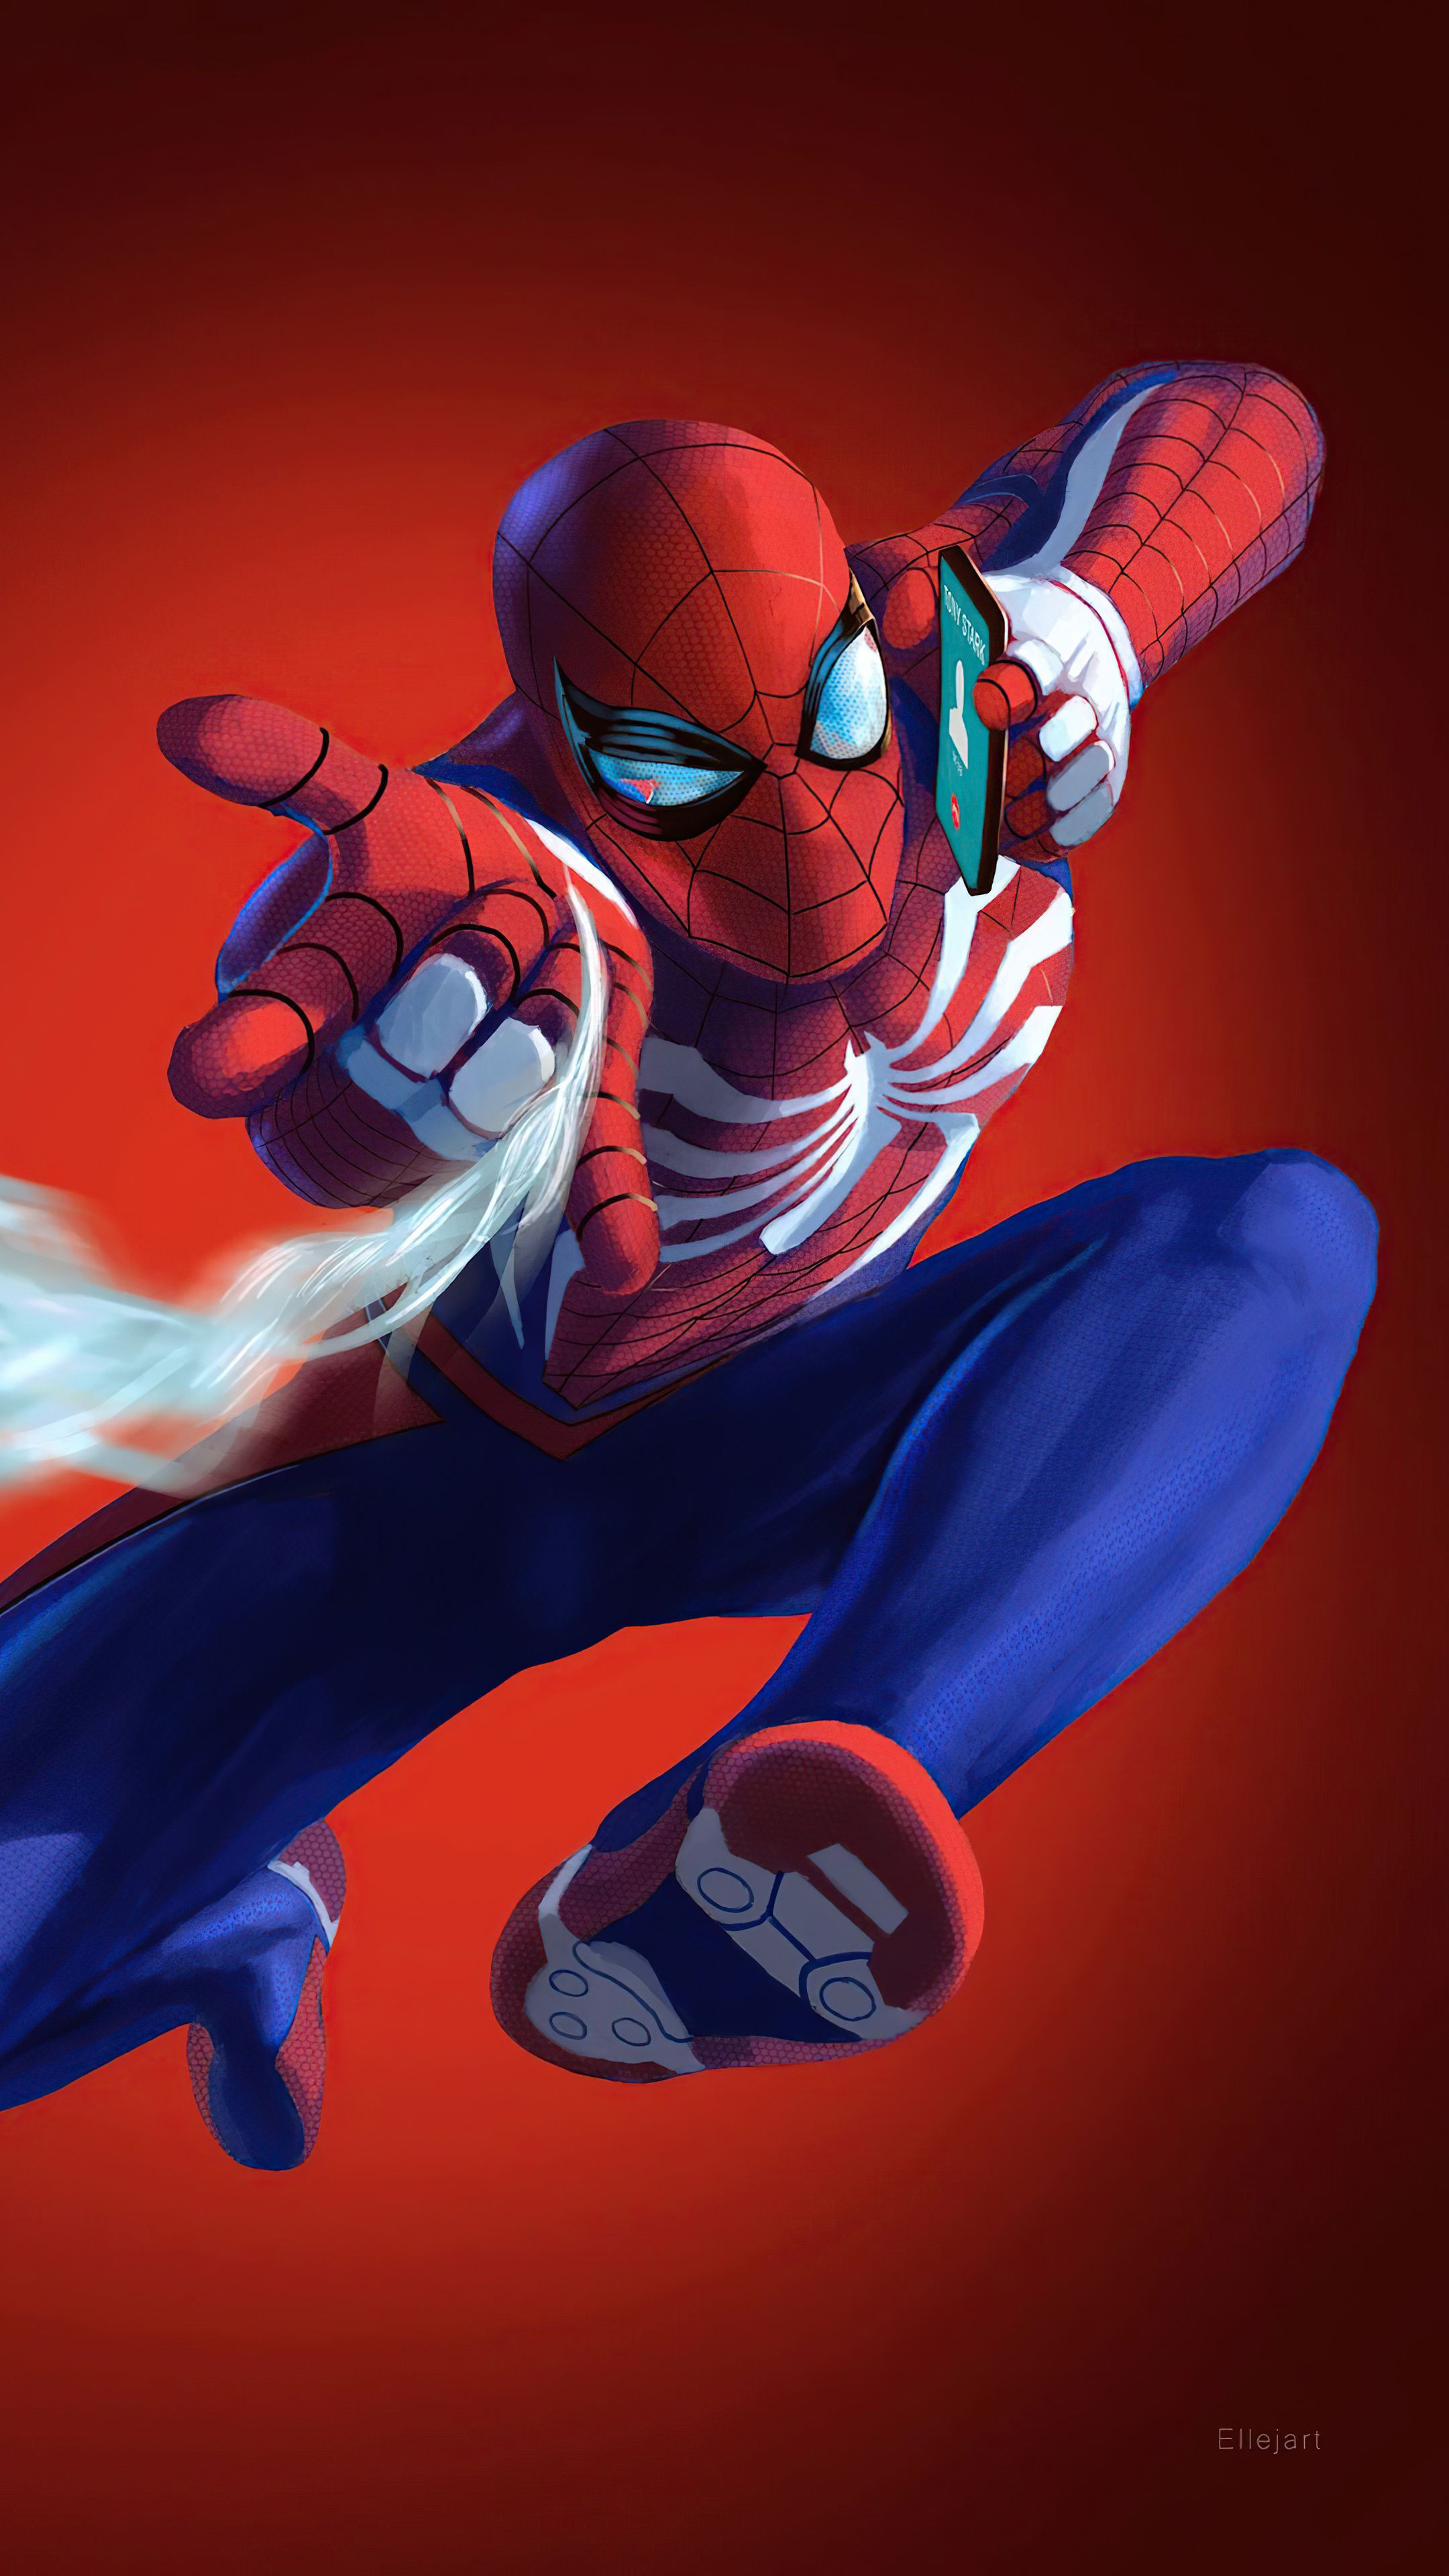 Spiderman On Phone 4k Sony Xperia X, XZ, Z5 Premium HD 4k Wallpaper, Image, Background, Photo and Picture